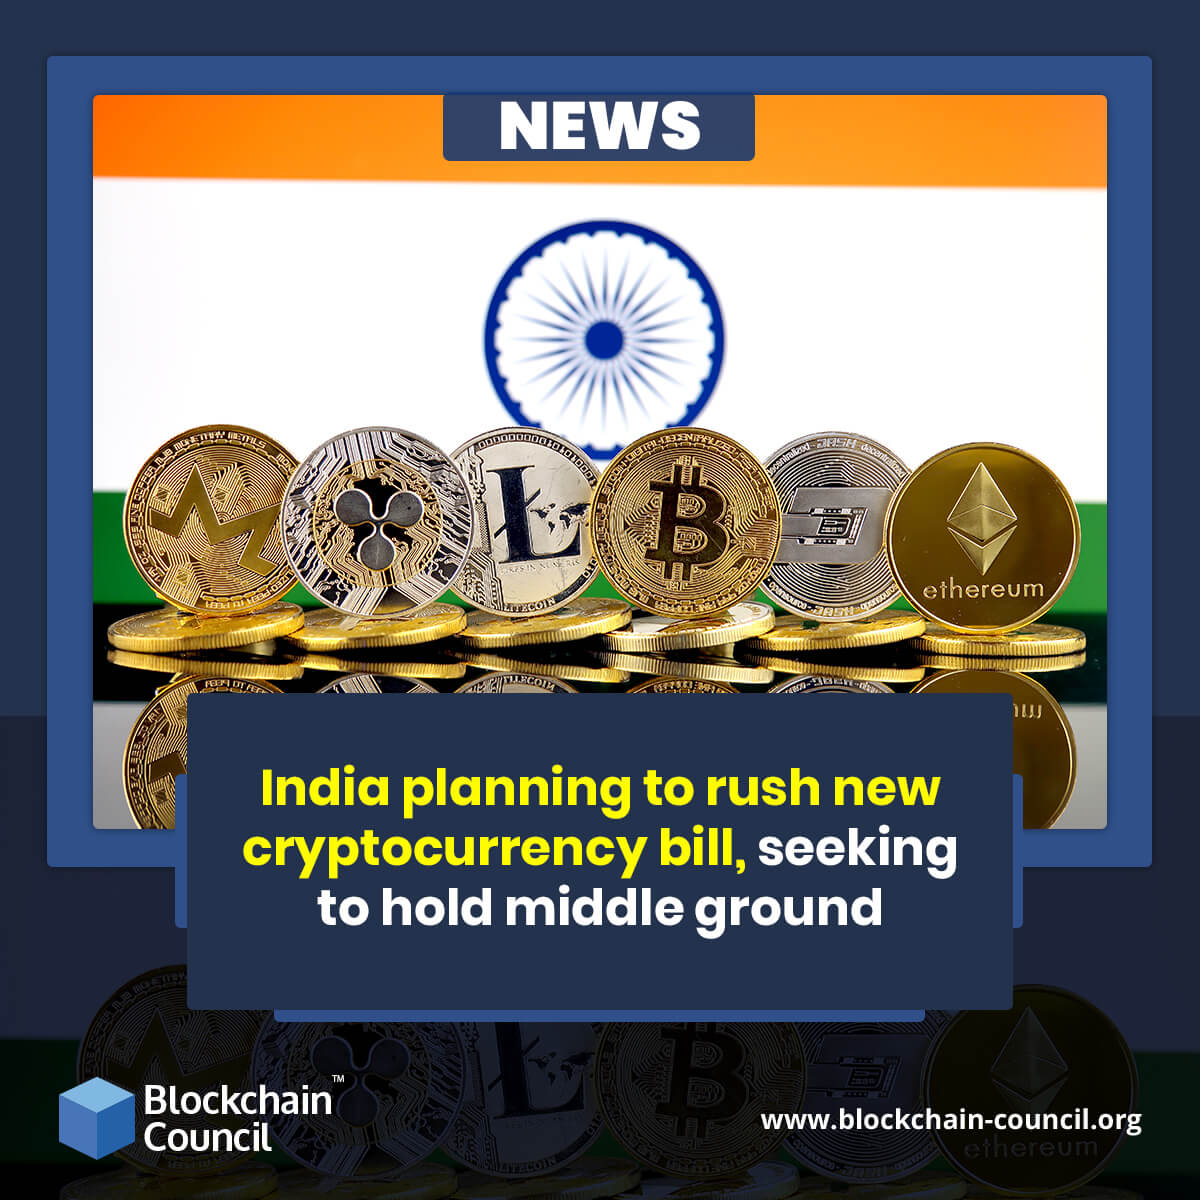 India planning to rush new cryptocurrency bill, seeking to hold middle ground